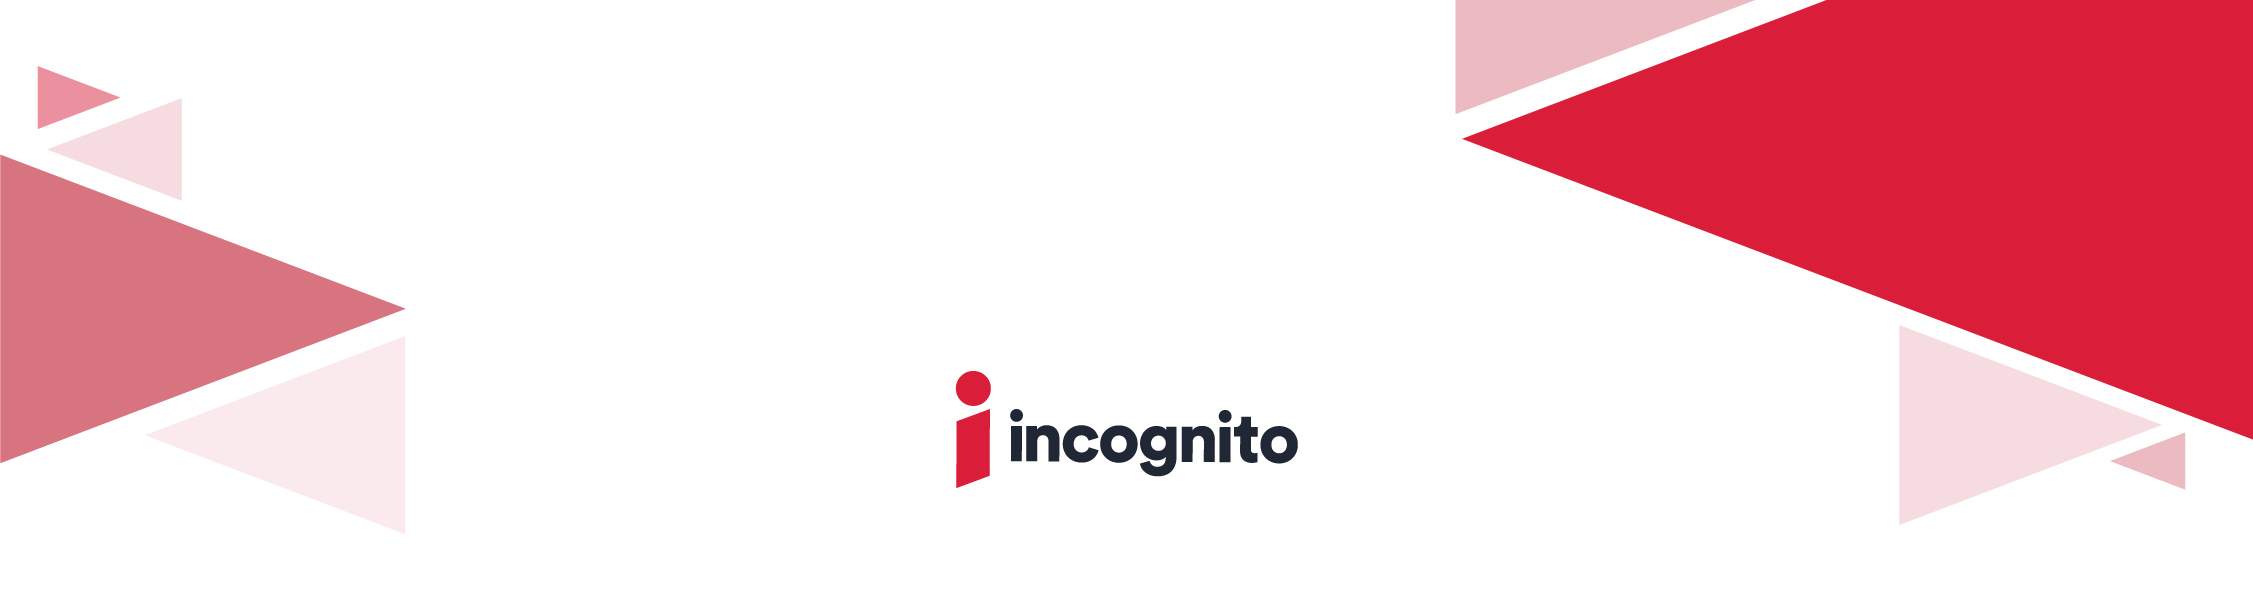 Incognito_DHE_resources_banner